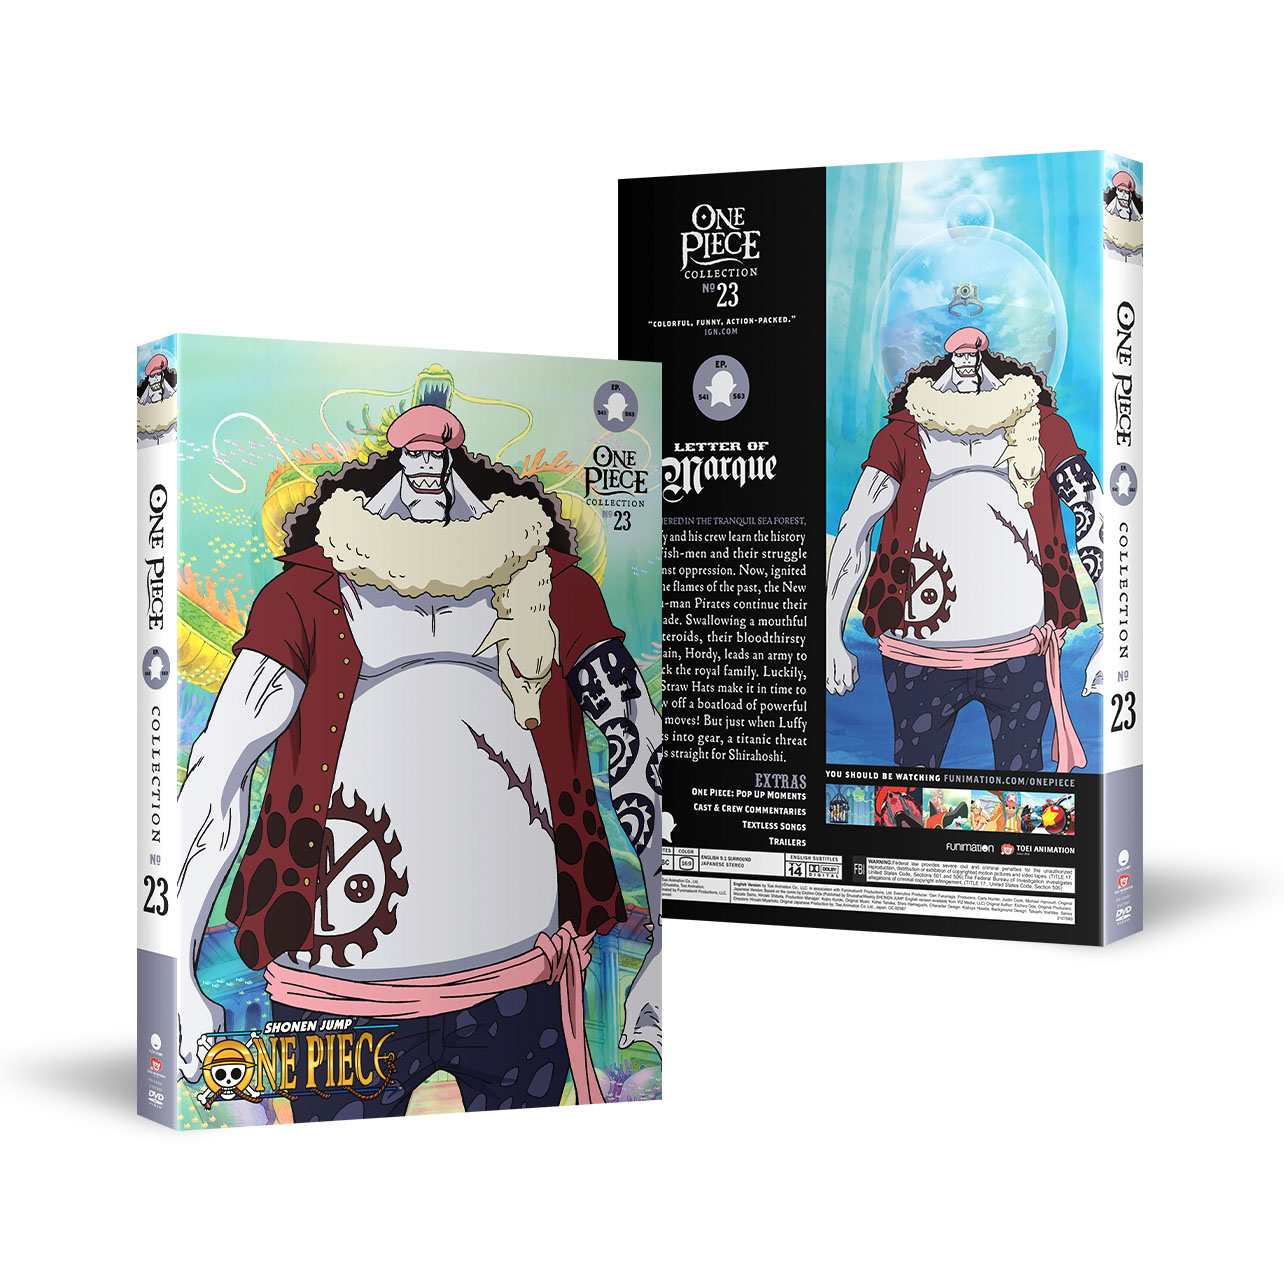 One Piece - Collection 23 DVD image count 0